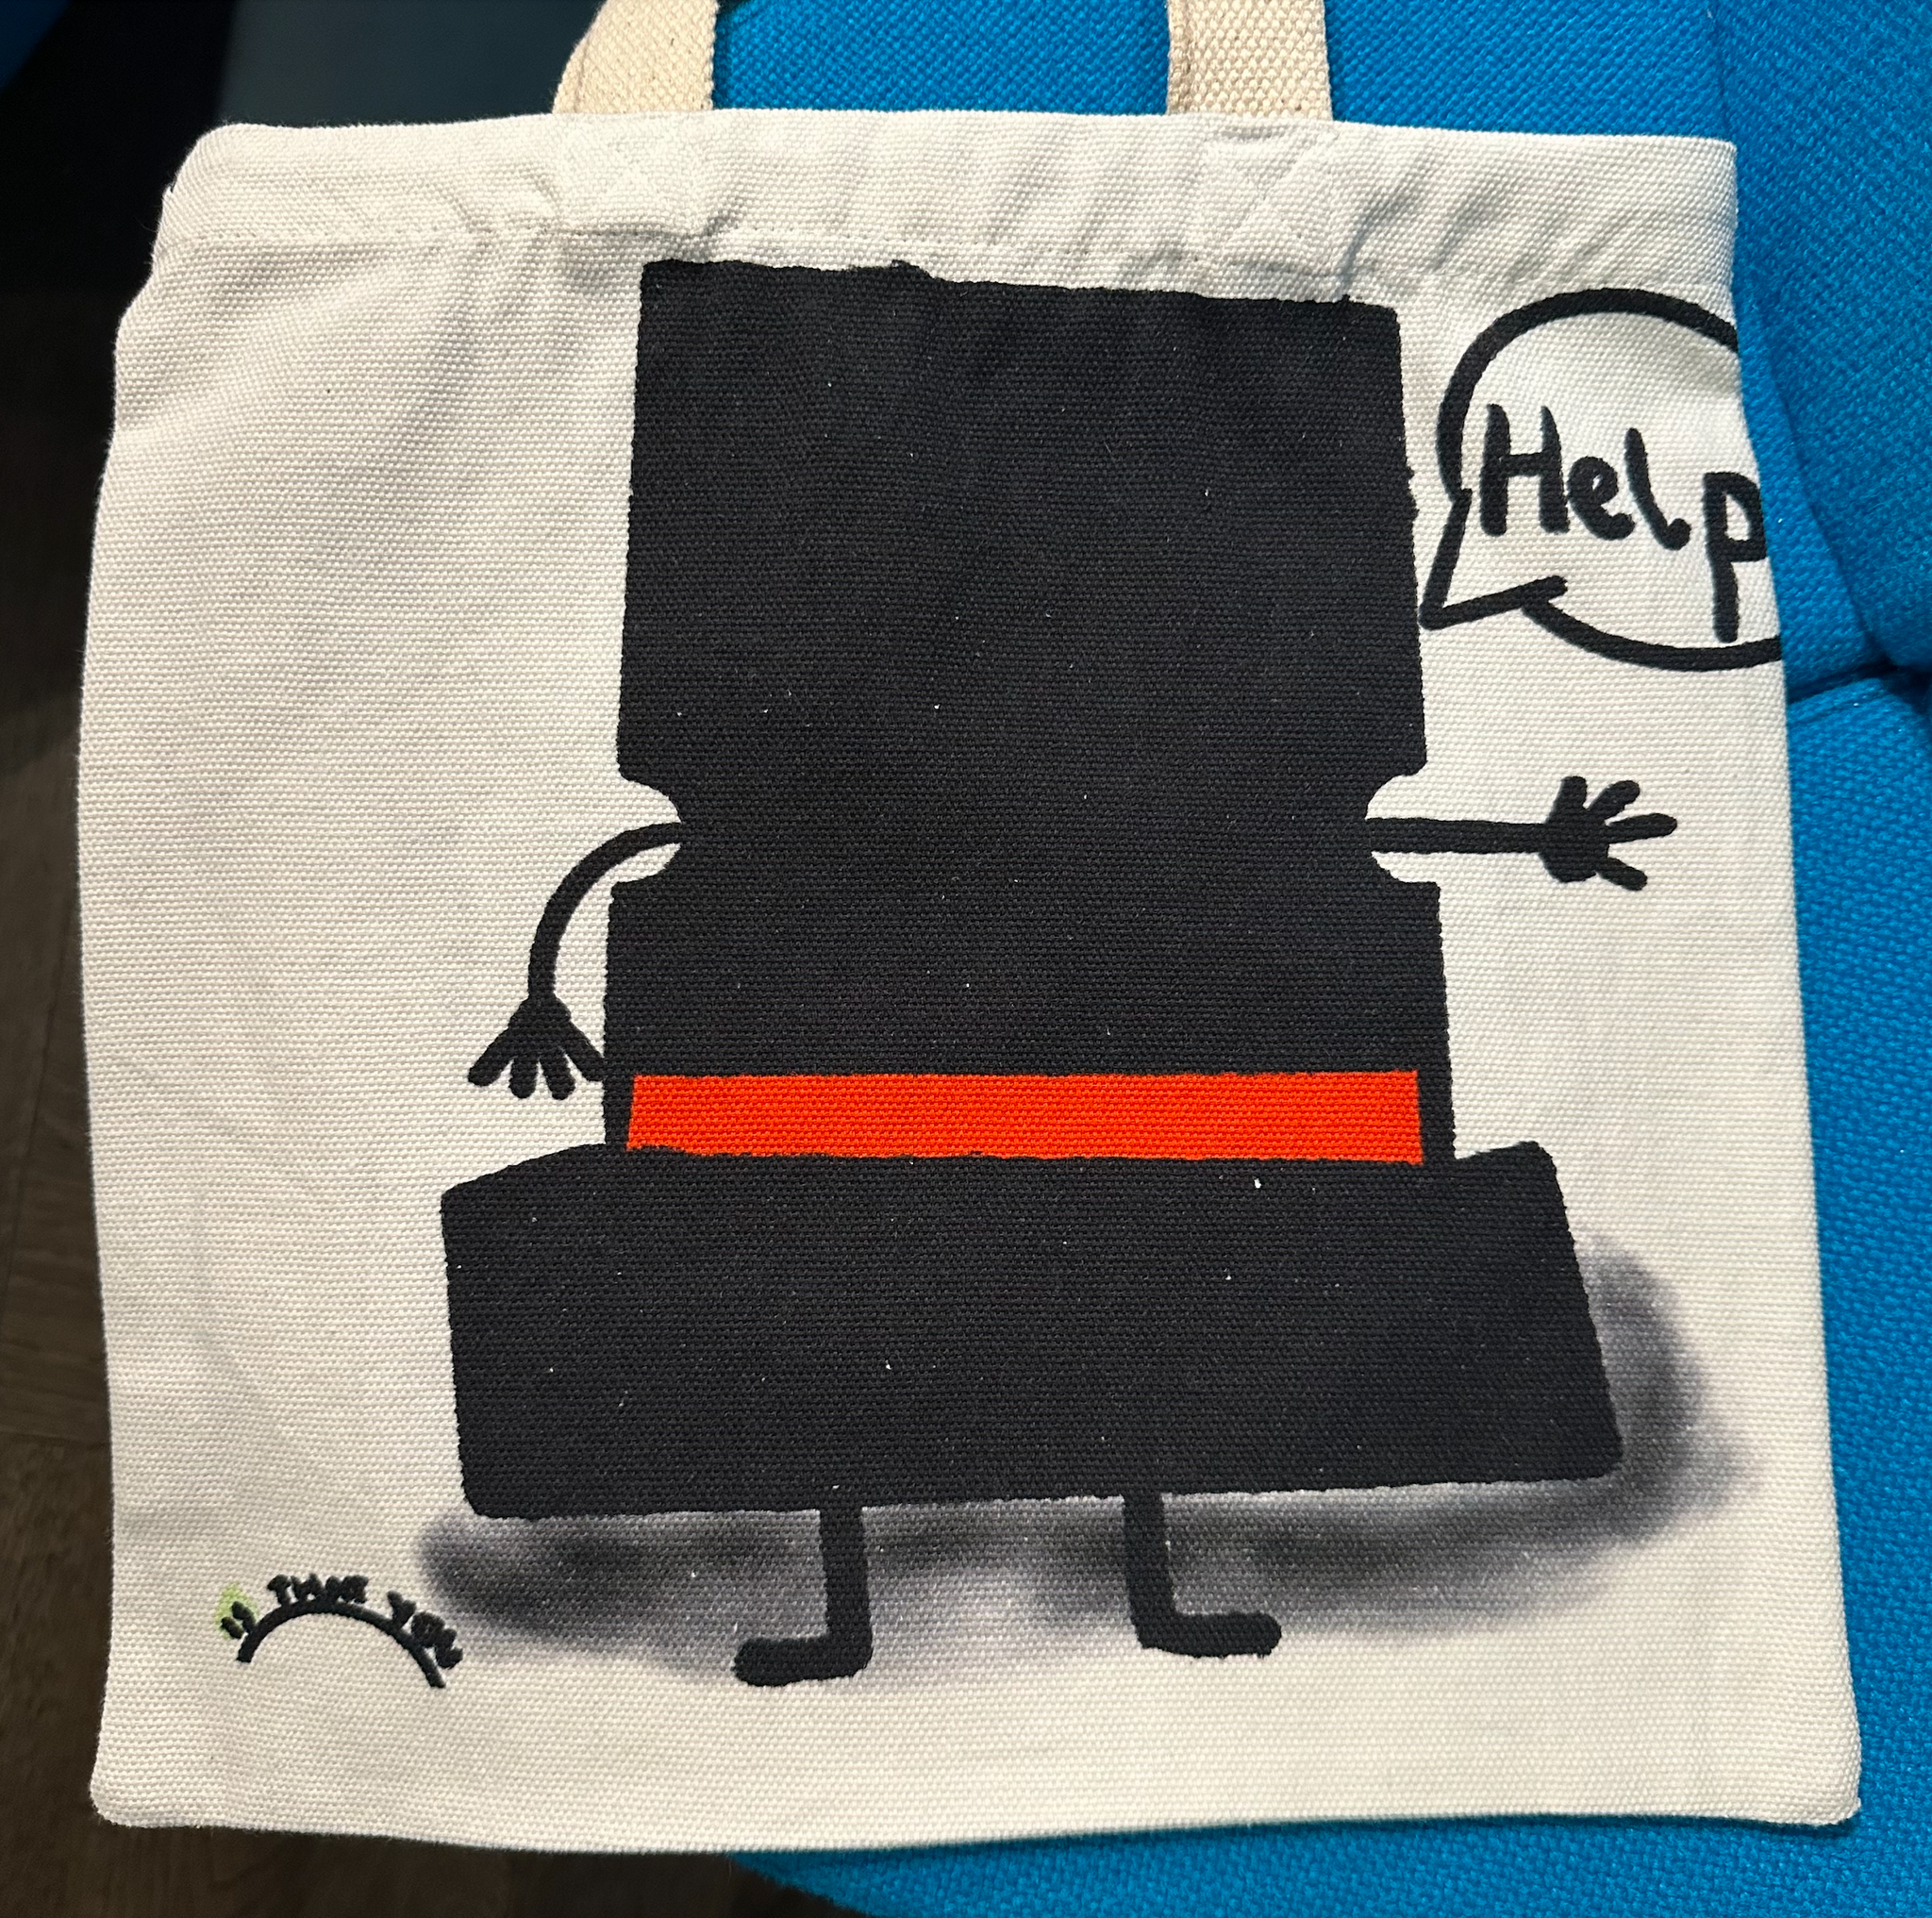 'Help' Mini Tote Bag IS THAT YOU by Wen Bromley